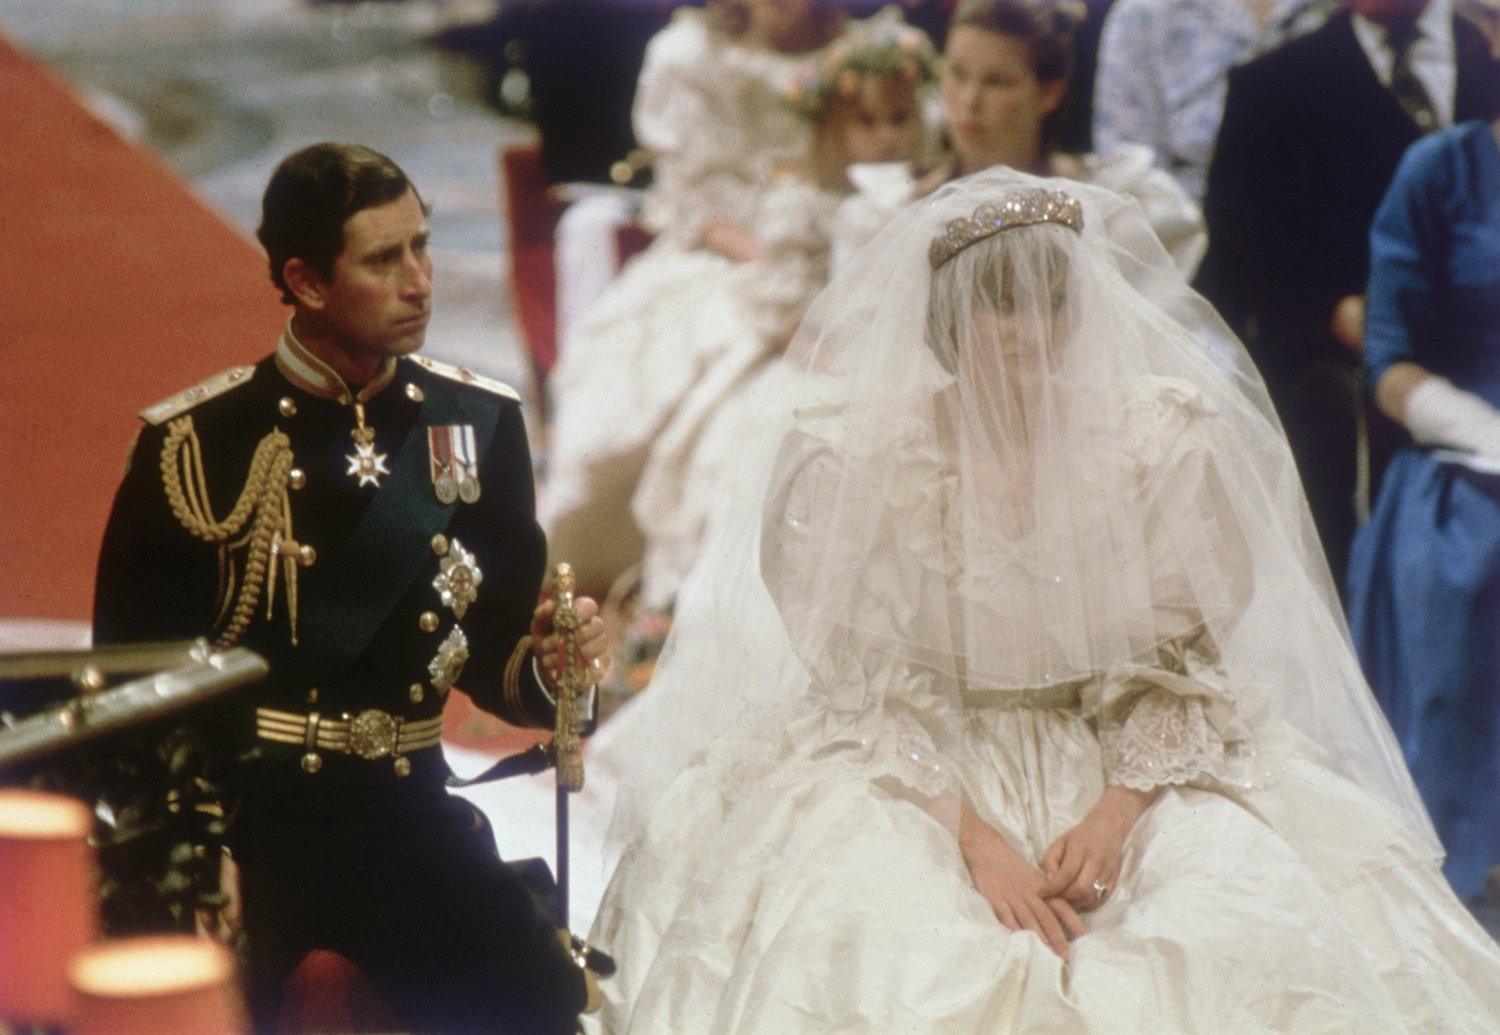 Prince Charles and Princess Diana at the altar during their royal wedding ceremony